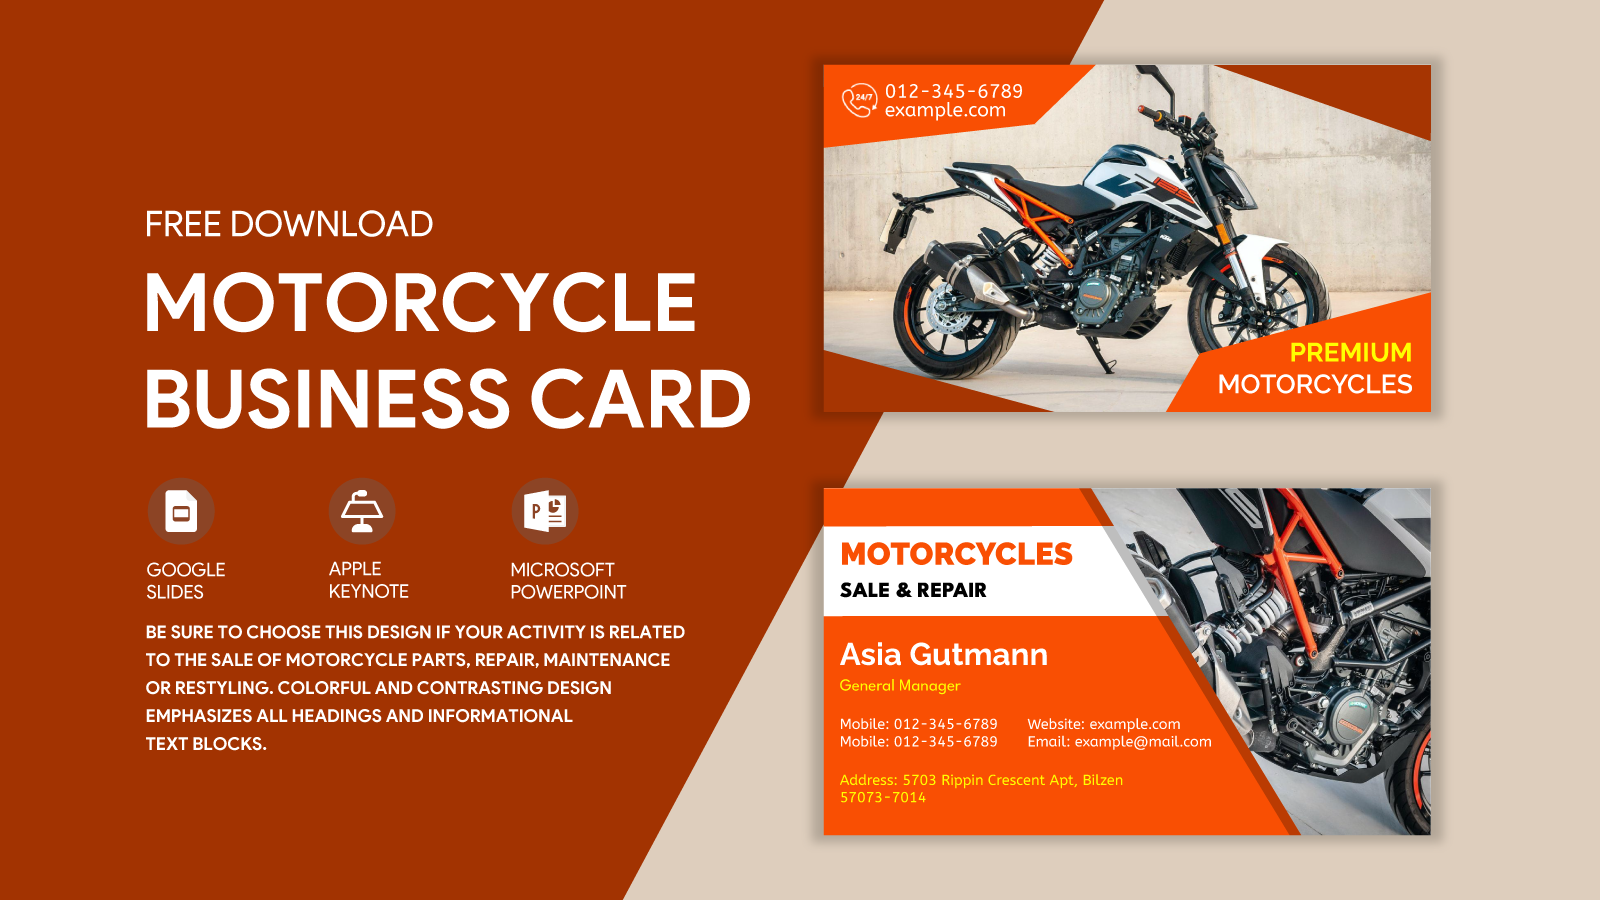 motorcycle spare parts business plan pdf free download